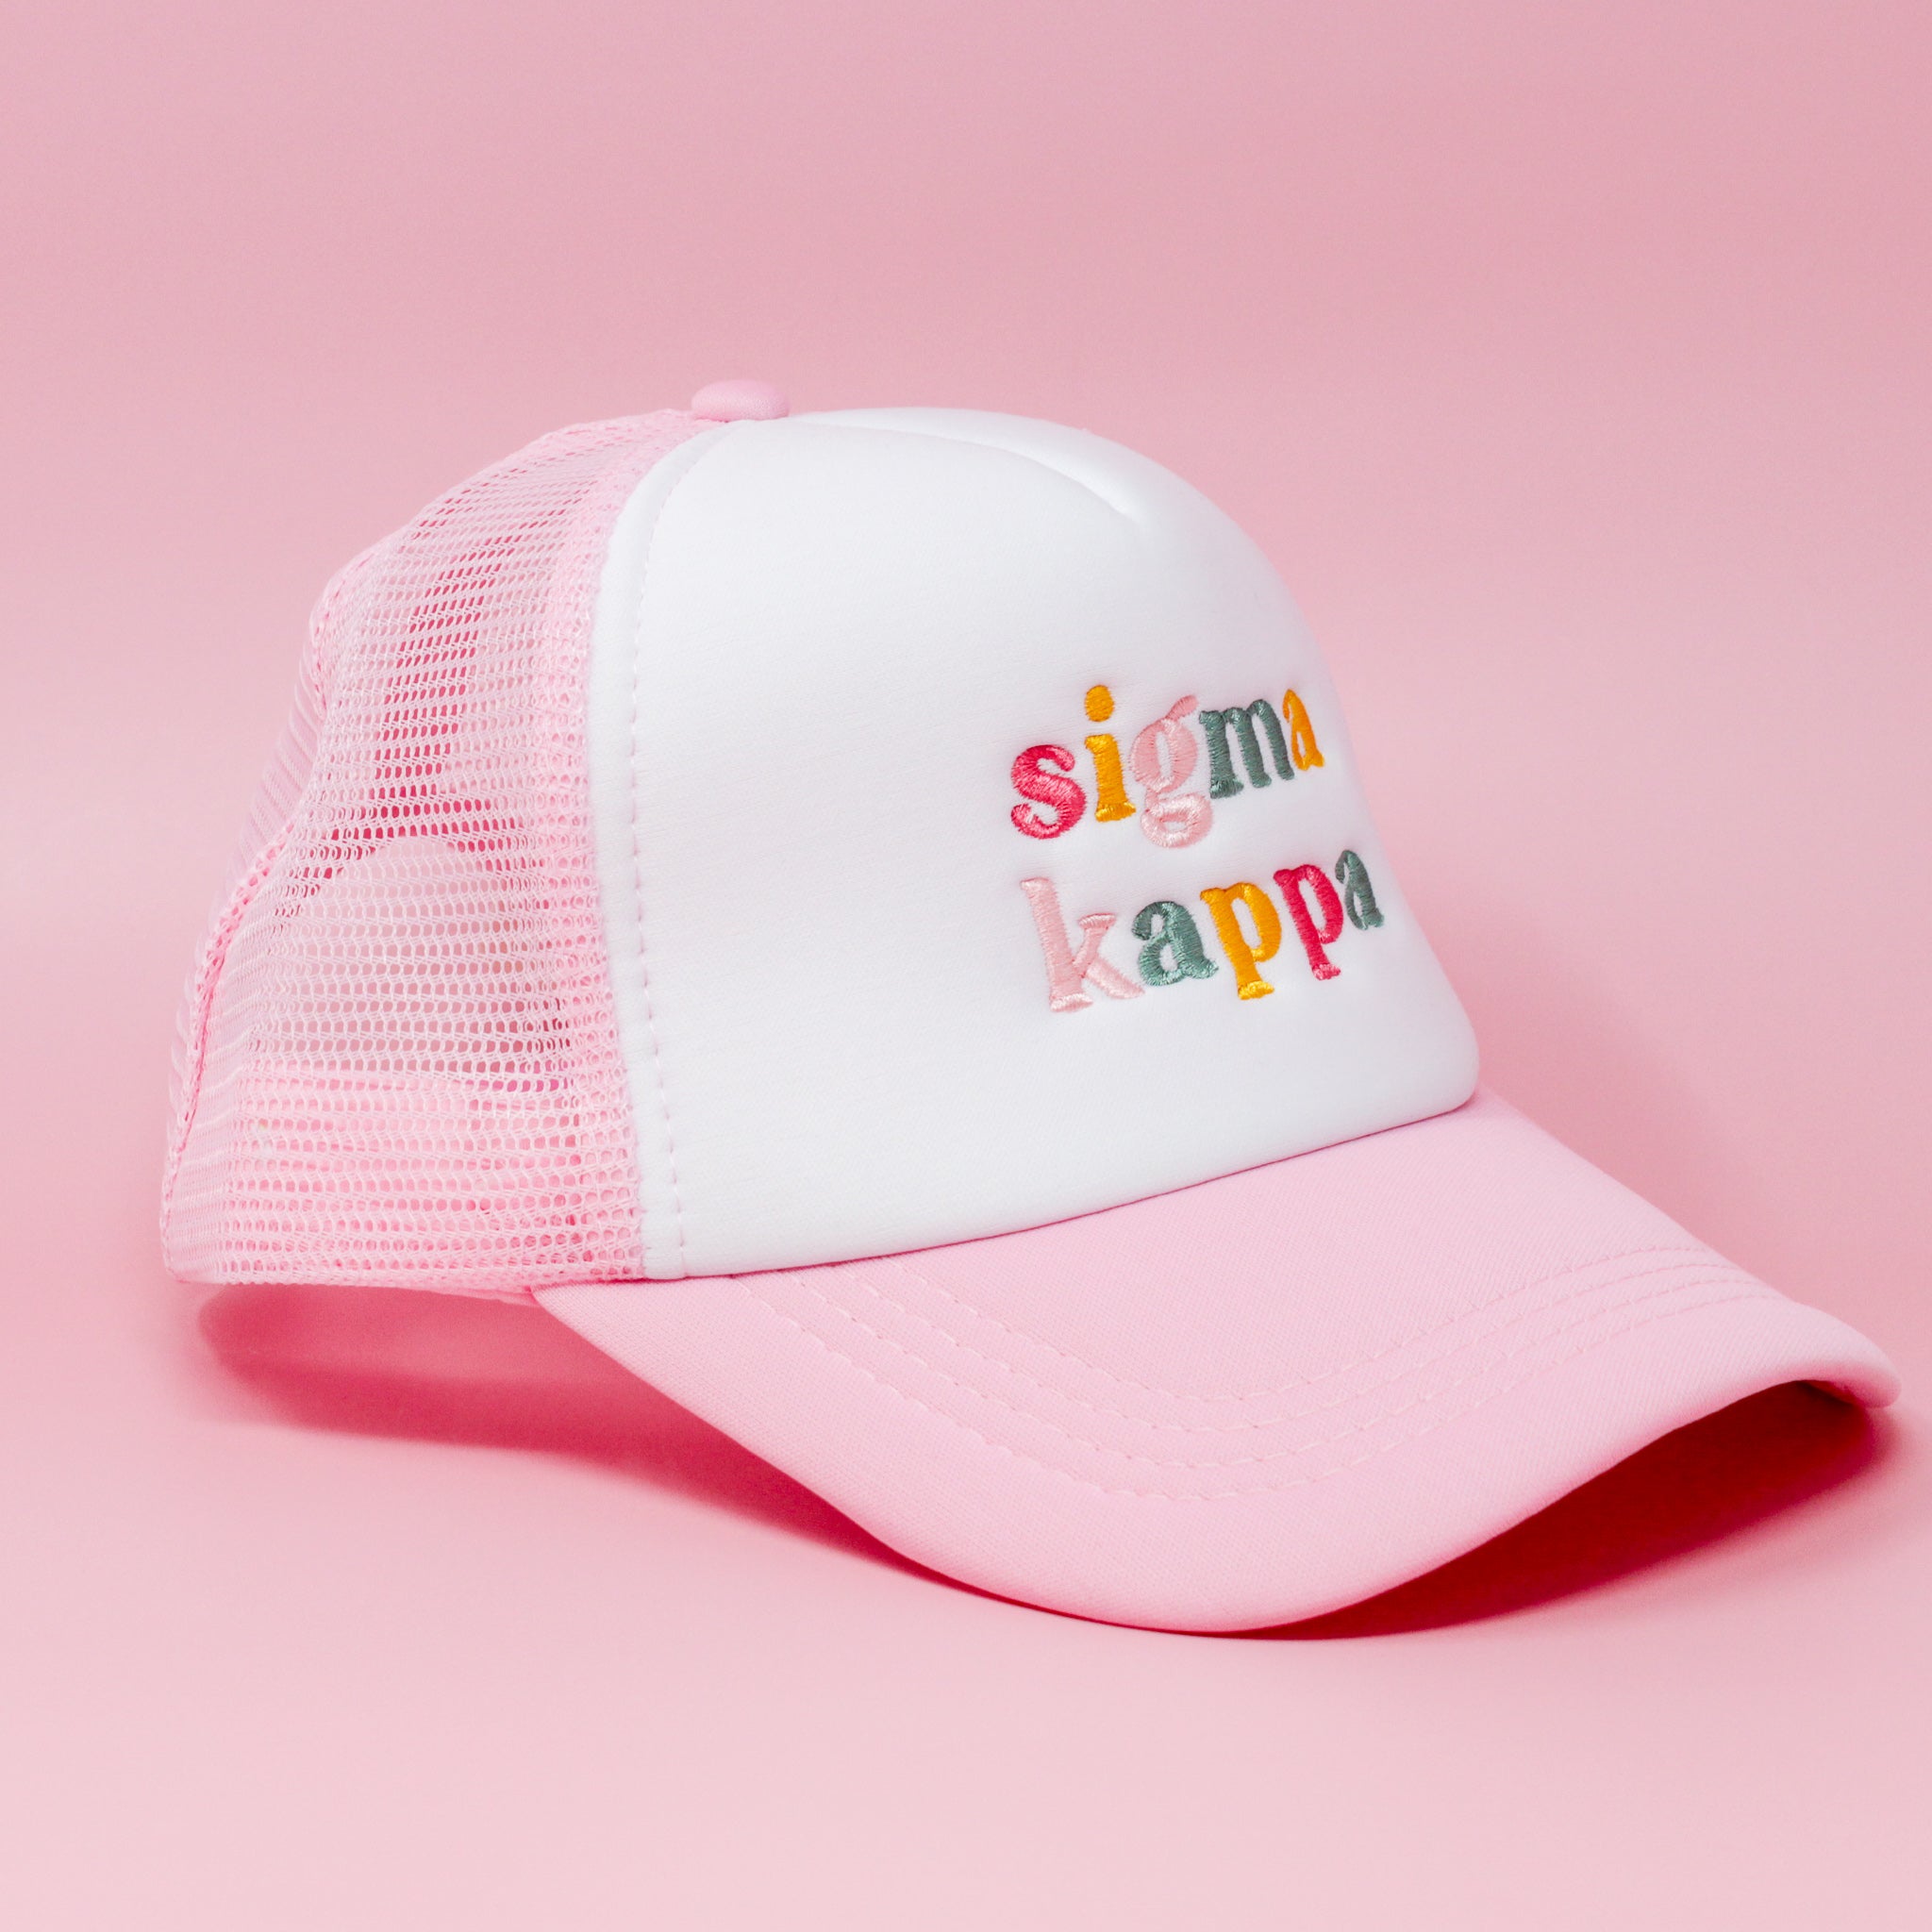 Sorority Embroidered Trucker Hat - 19 Chapters Available!